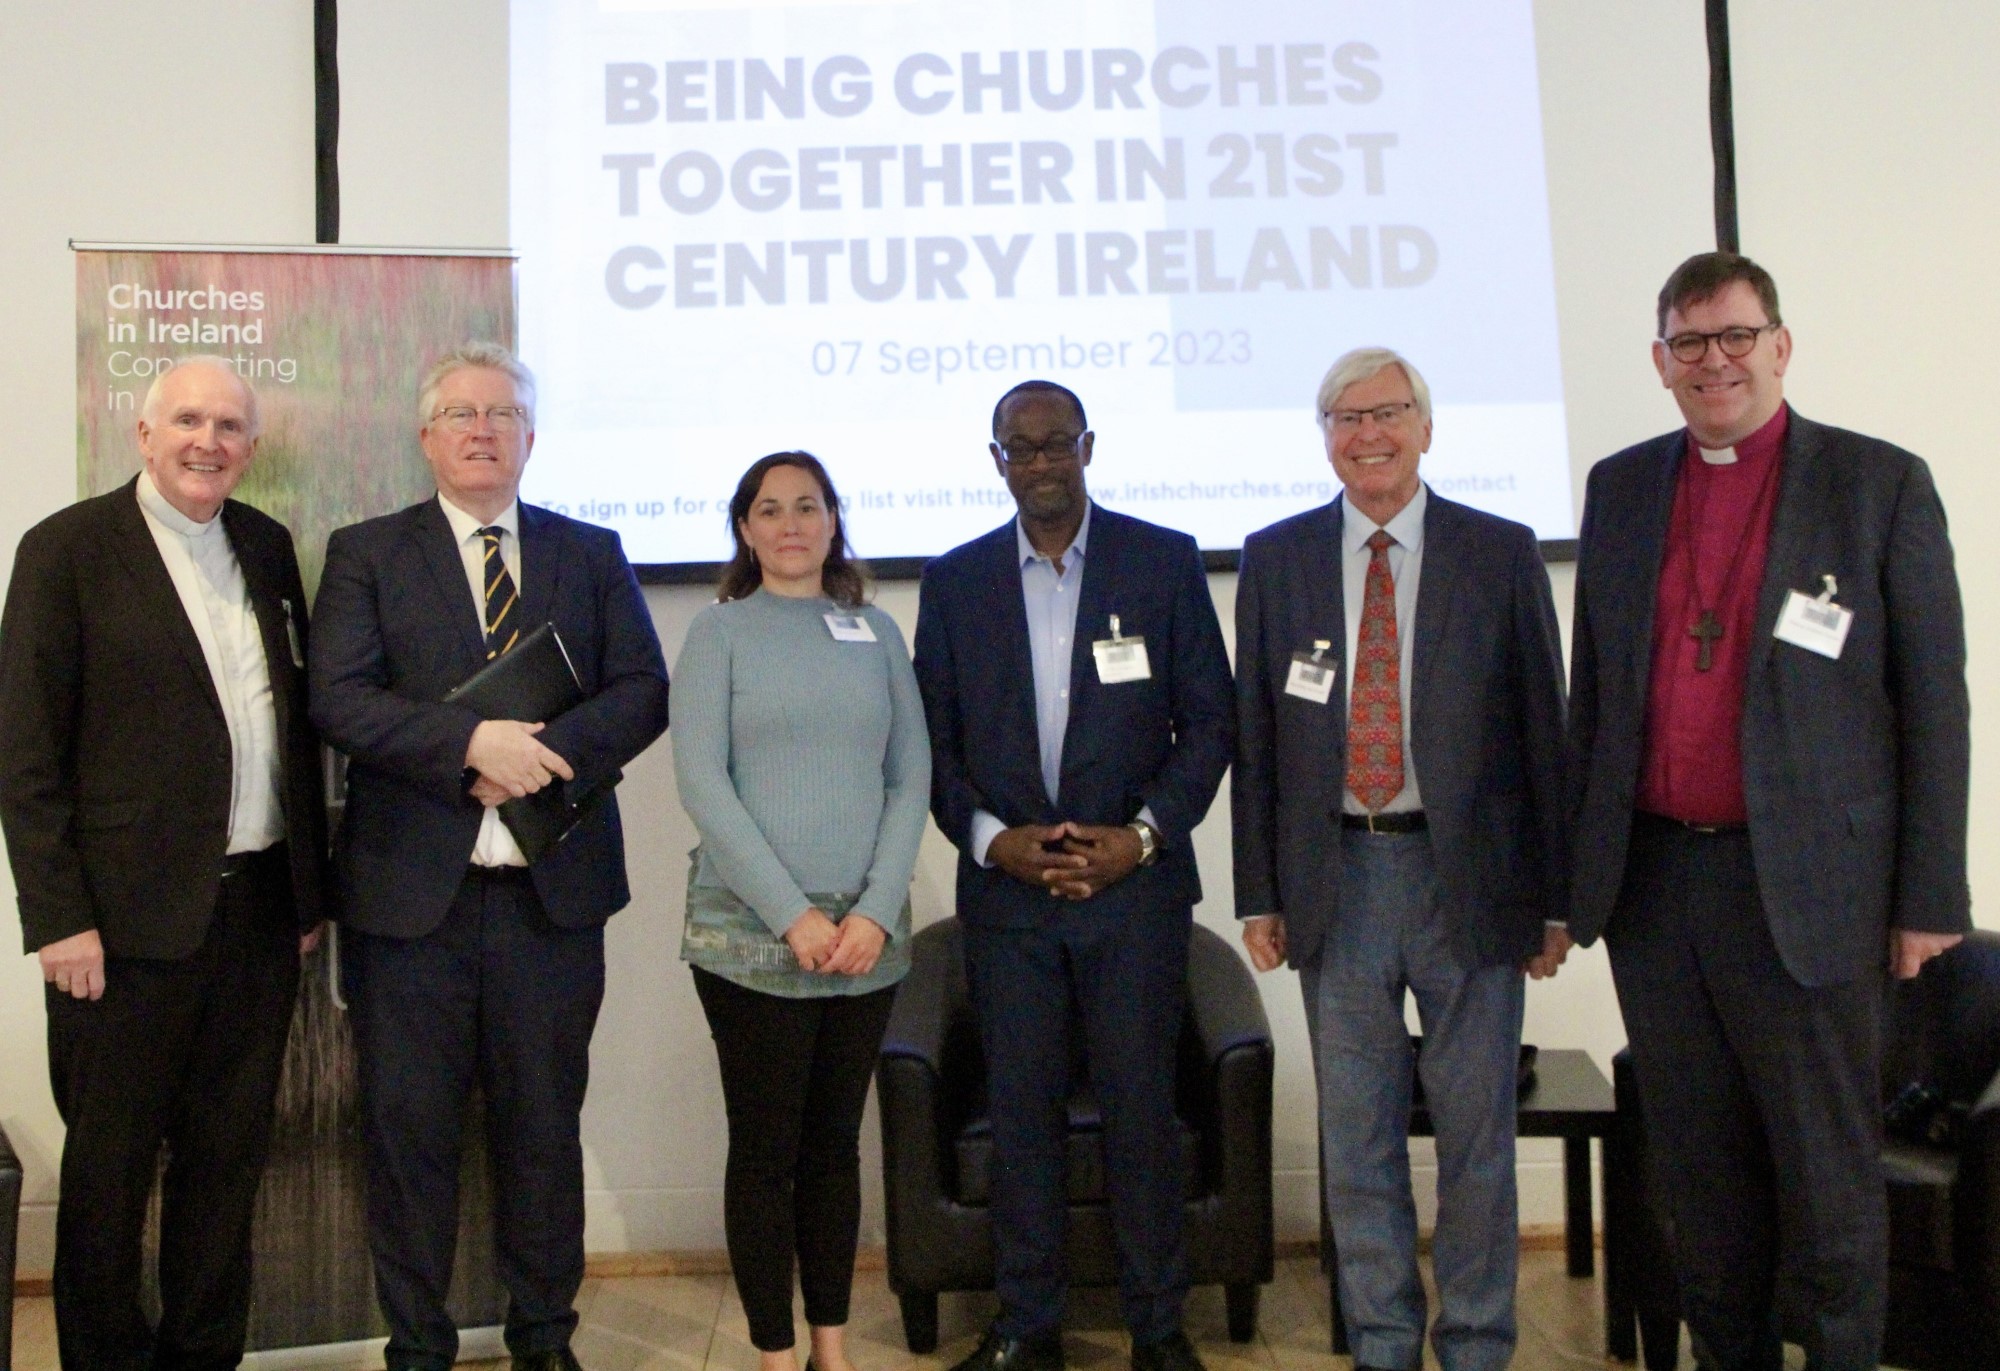 Bishop Brendan Leahy (IICM Co-Chair), Prof Daire Keogh (President of DCU), Dr Nicola Brady (CTBI), the Rev Livingstone Thompson (Moravian Church), Prof Philip McDonagh (DCU) and Bishop Andrew Forster (IICM Co-Chair) at the symposium today.